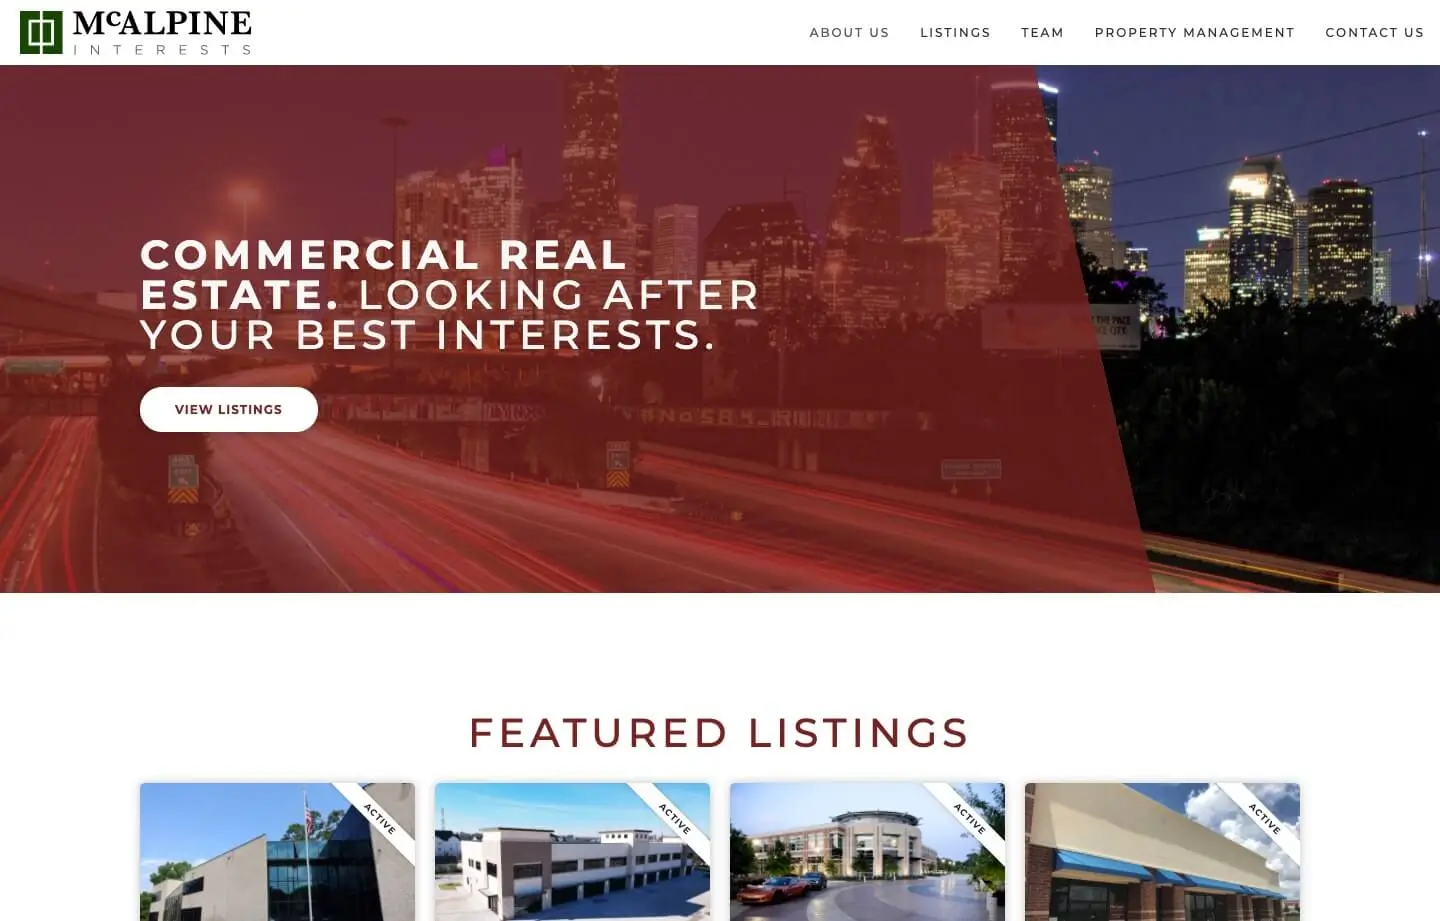 Real estate and brokerage and property management website for McAlpine Interests